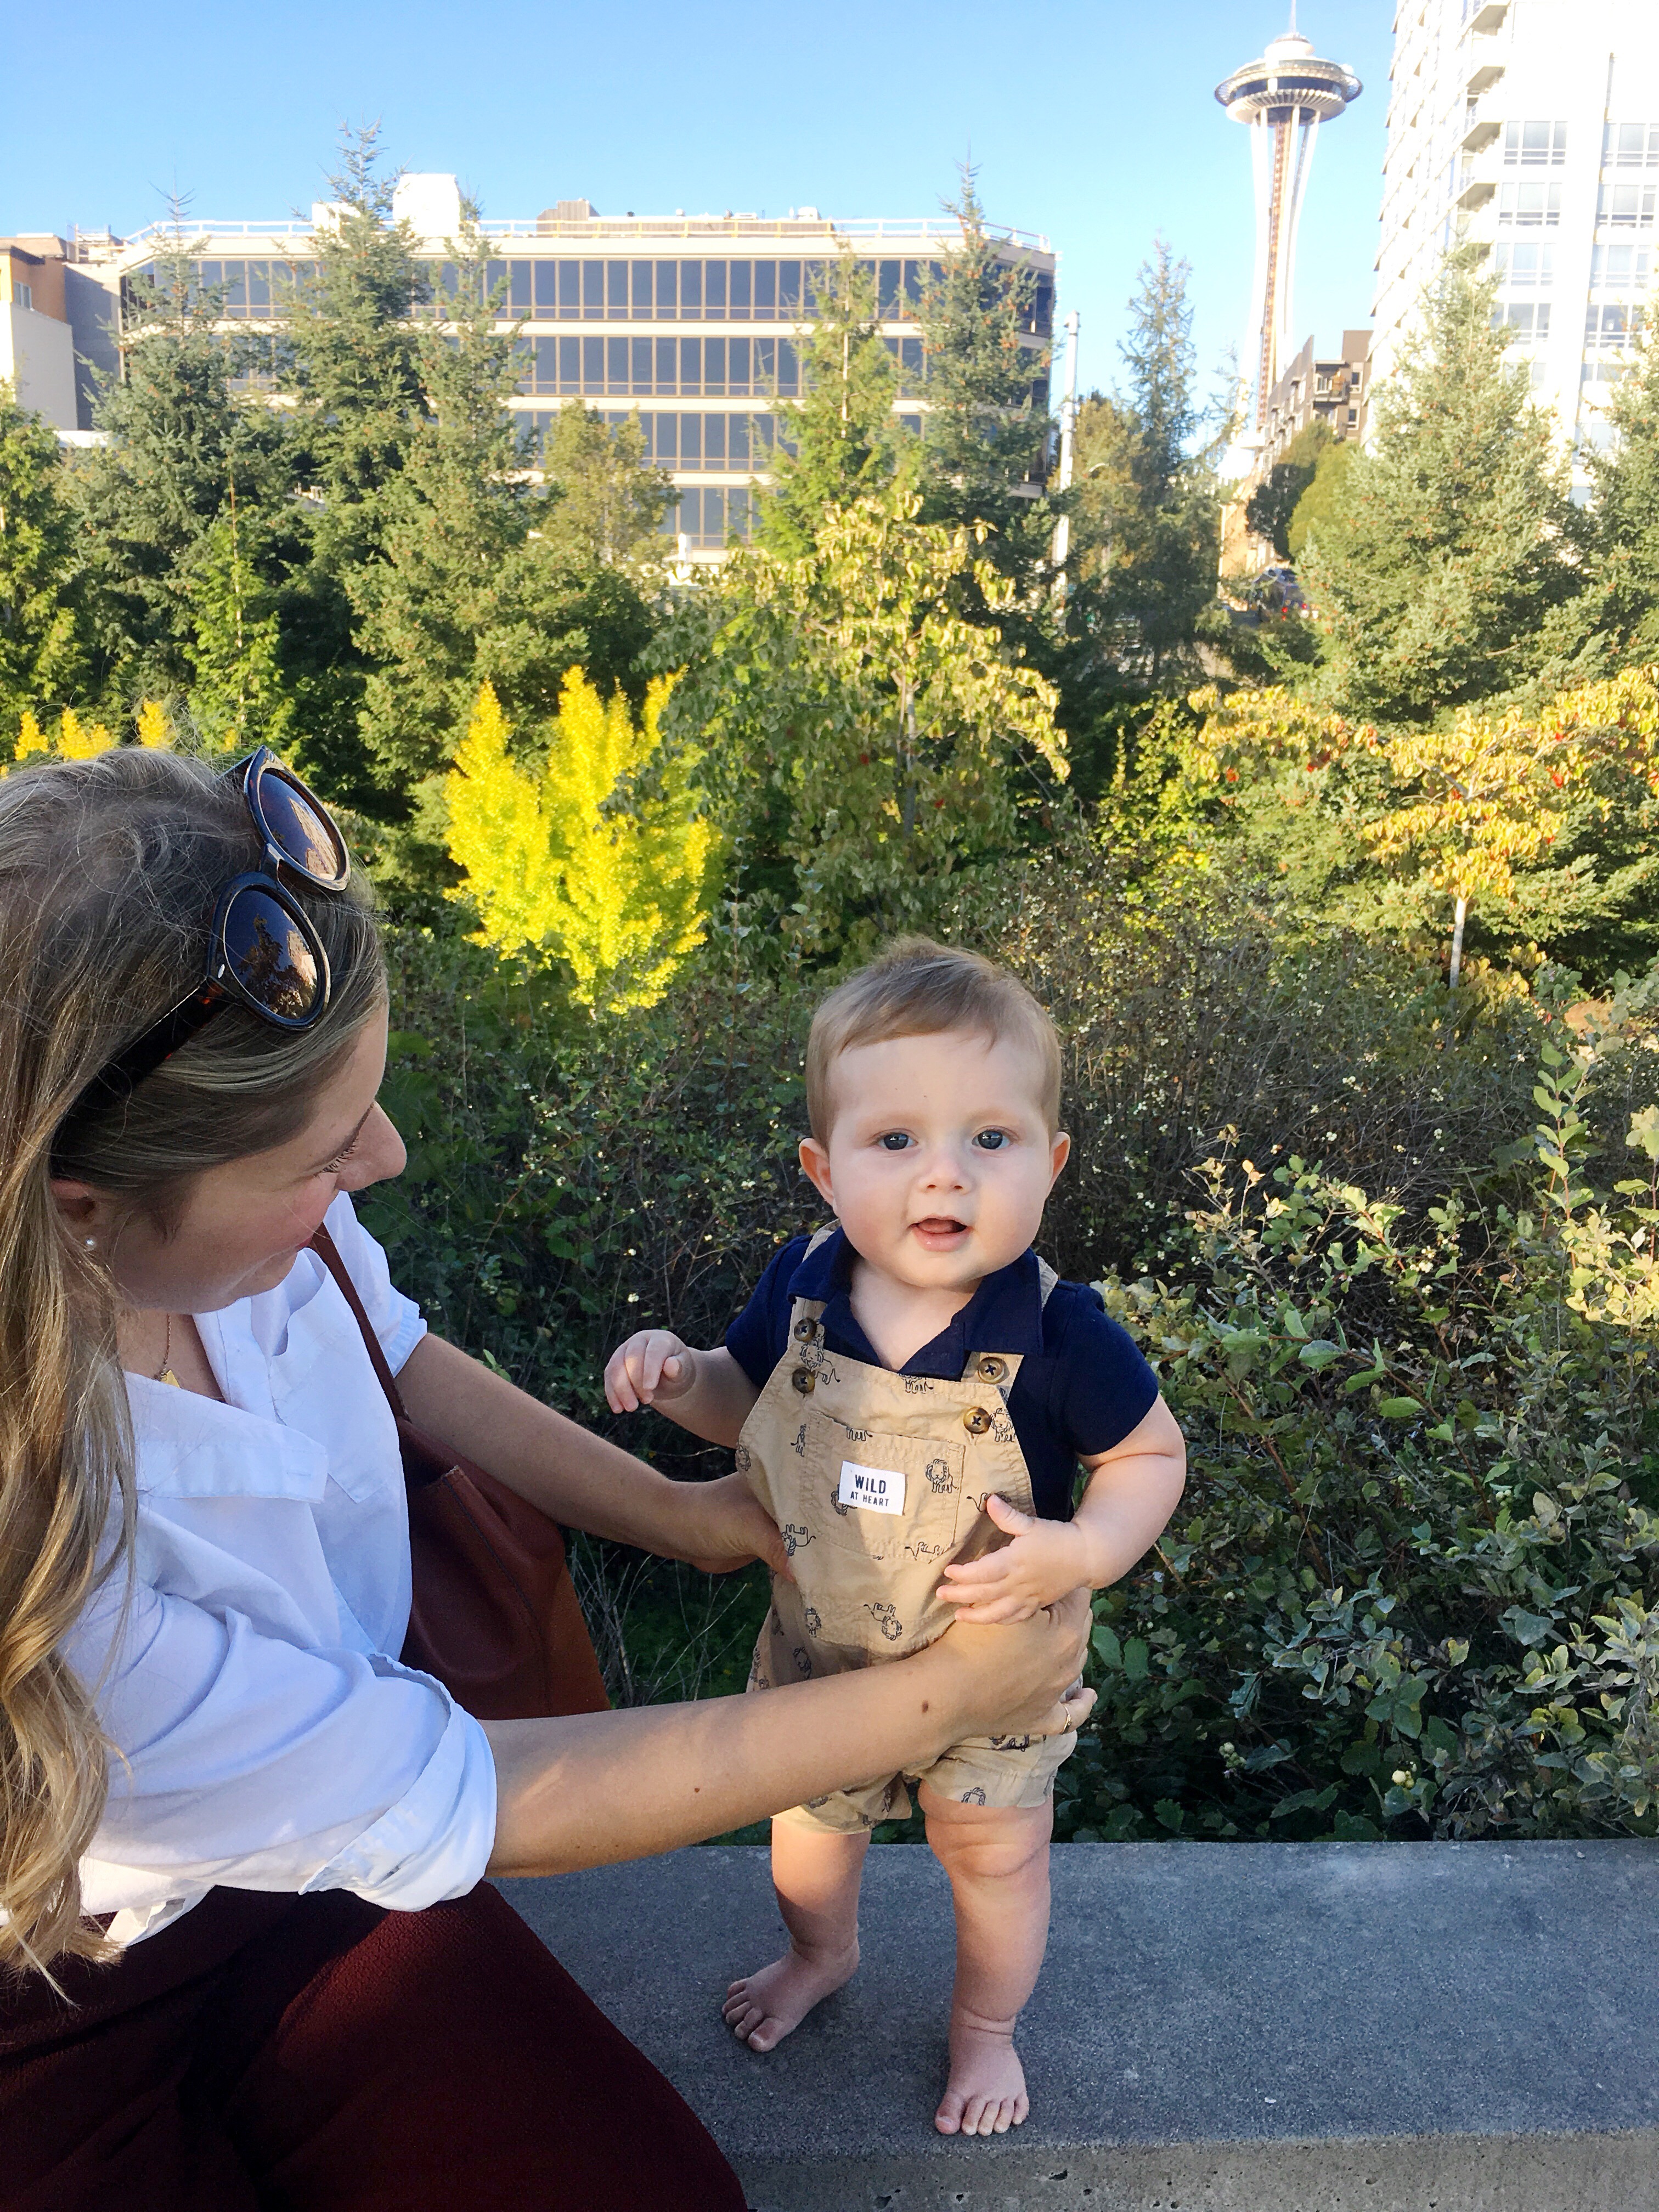 where to find preppy clothes for baby boys - Northwest Blonde - Seattle style blog